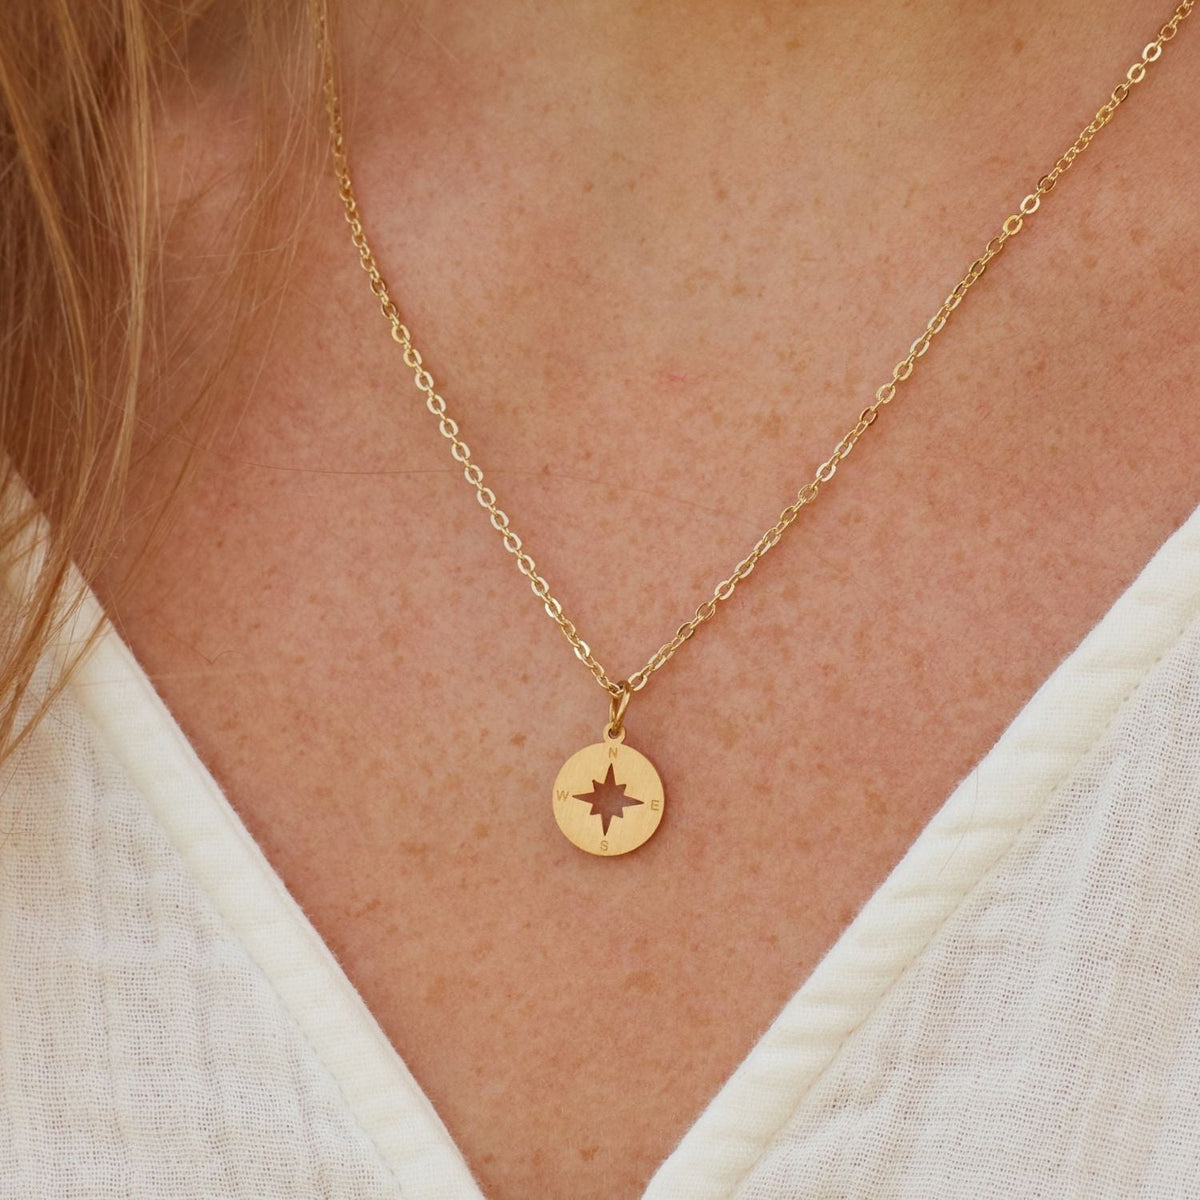 Mama to an Angel | Carried You Every Second of Your Life | Compass Necklace